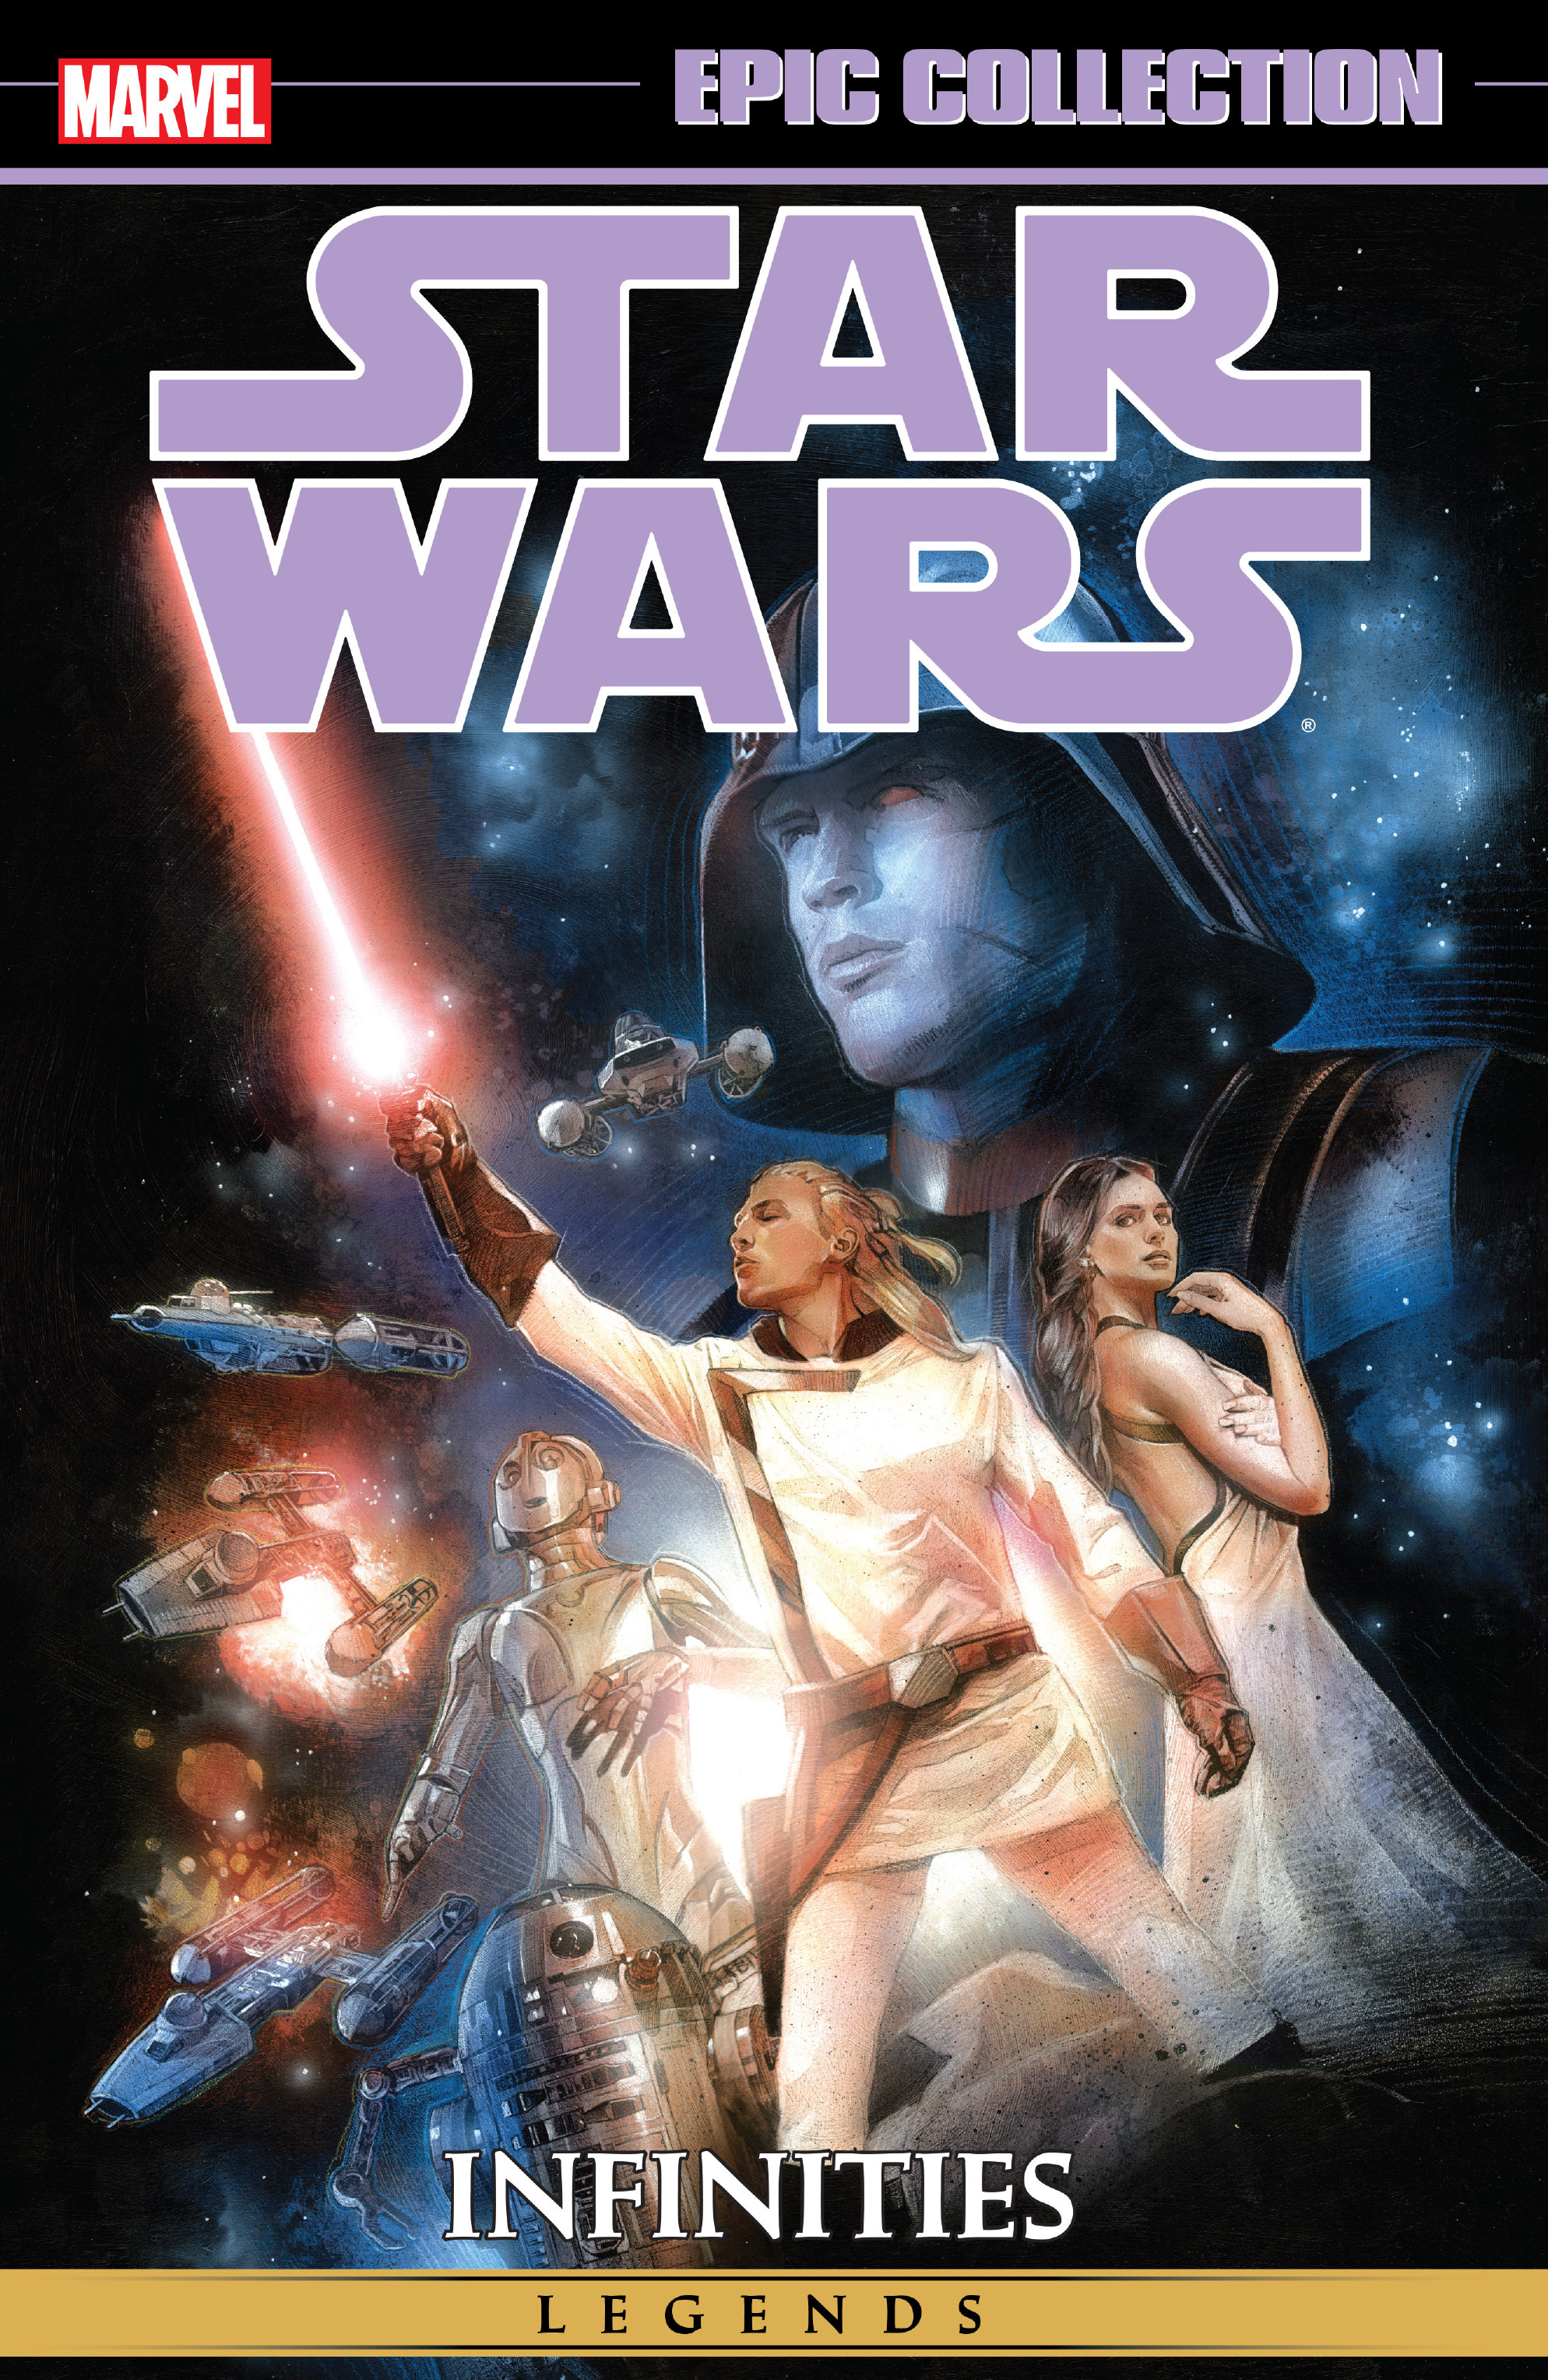 Star Wars Legends Epic Collection - Infinities (Marvel Edition) (2015) 1